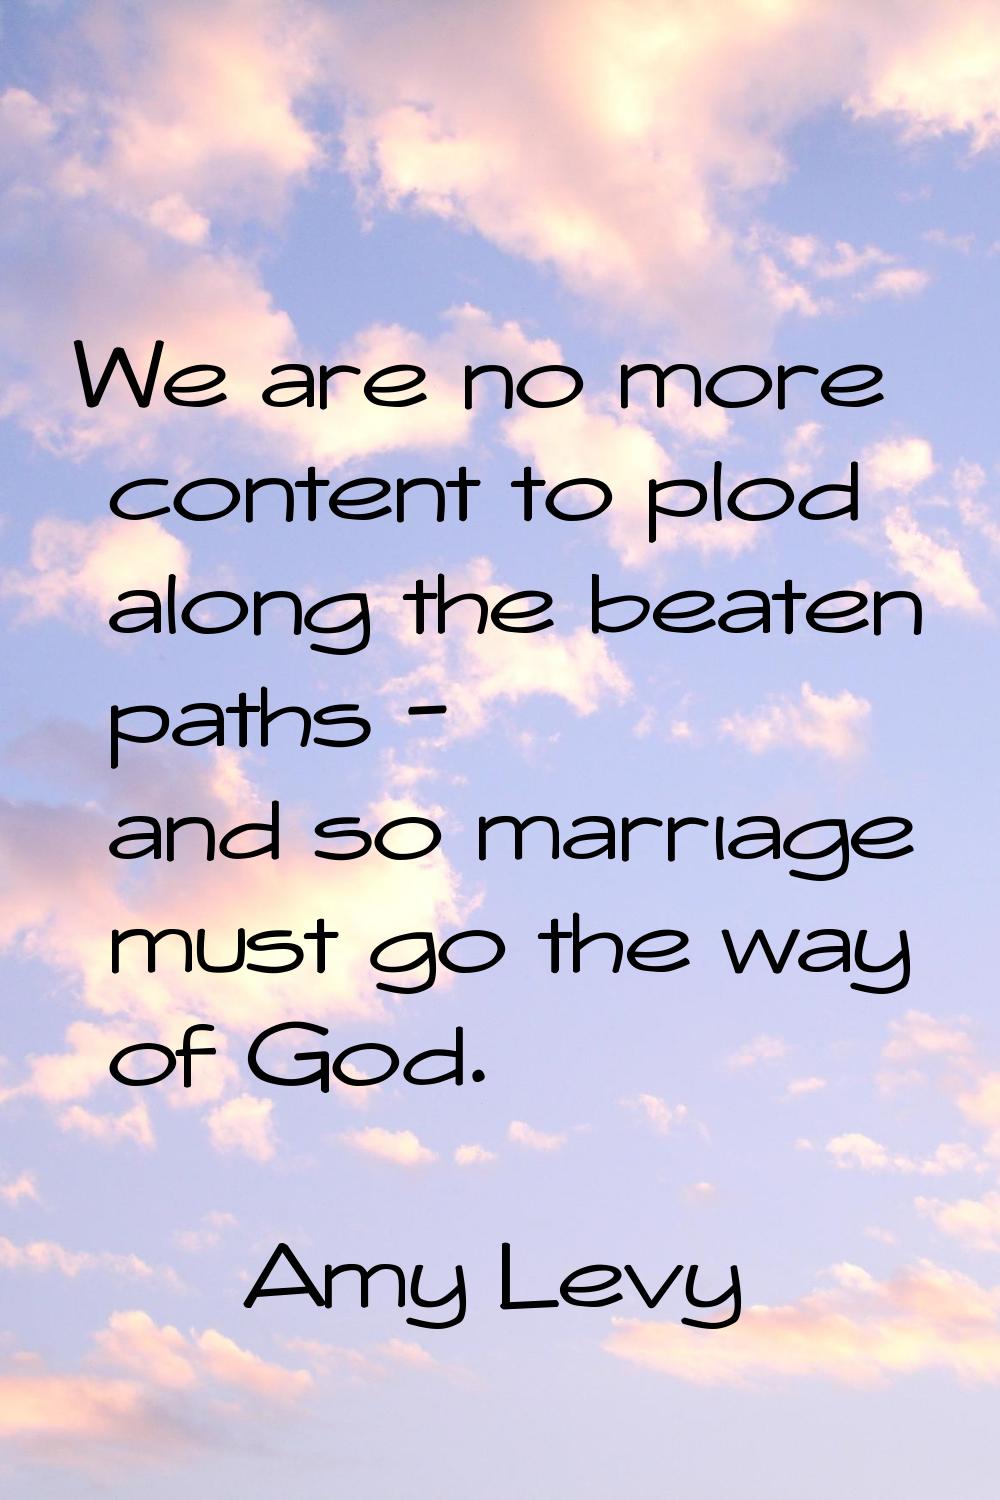 We are no more content to plod along the beaten paths - and so marriage must go the way of God.